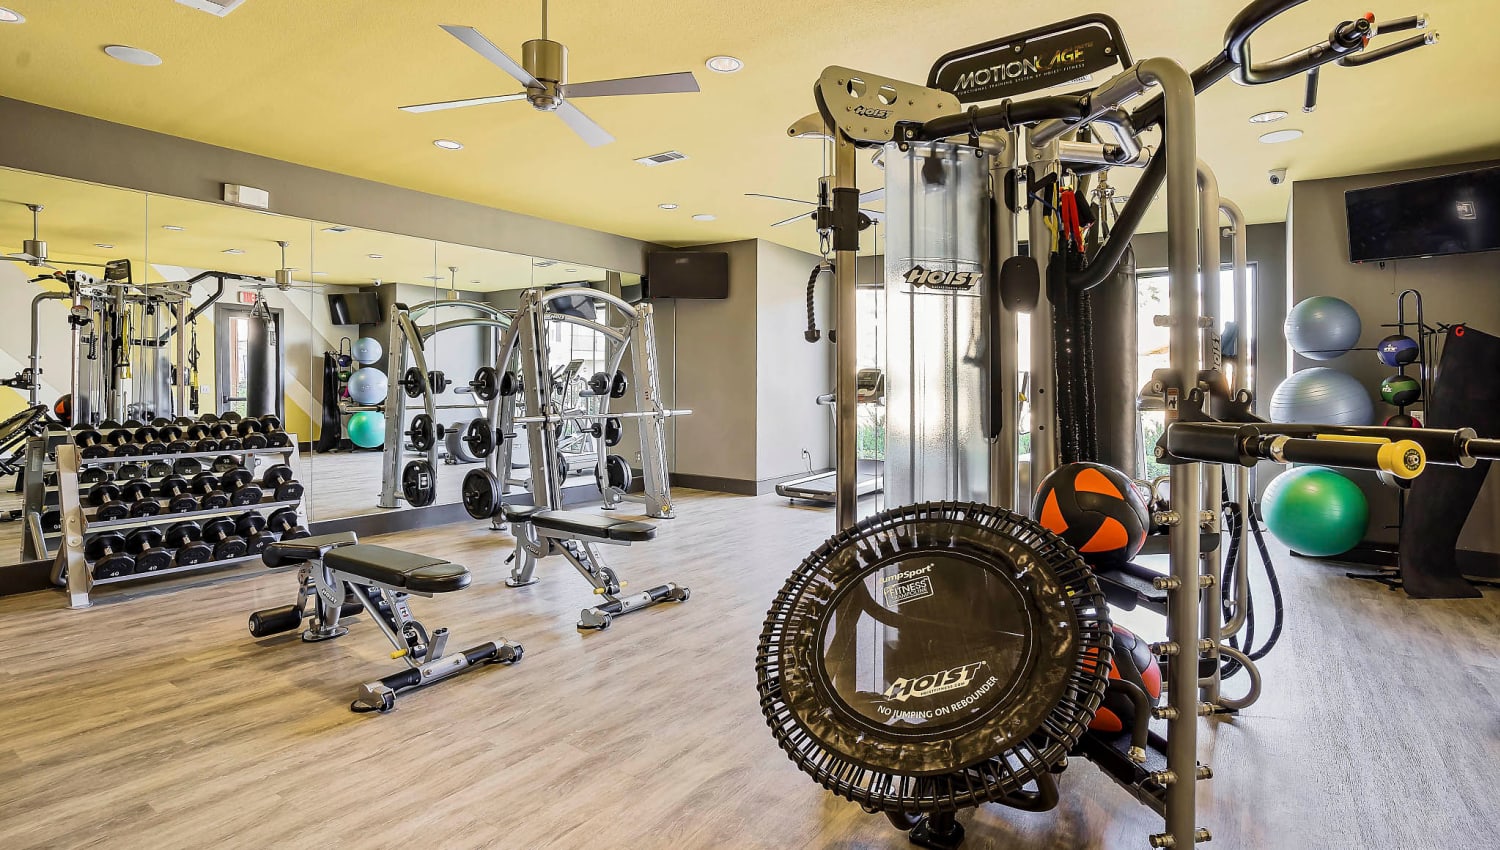 Free weights and exercise machines in the fitness center at Sundance Creek in Midland, Texas